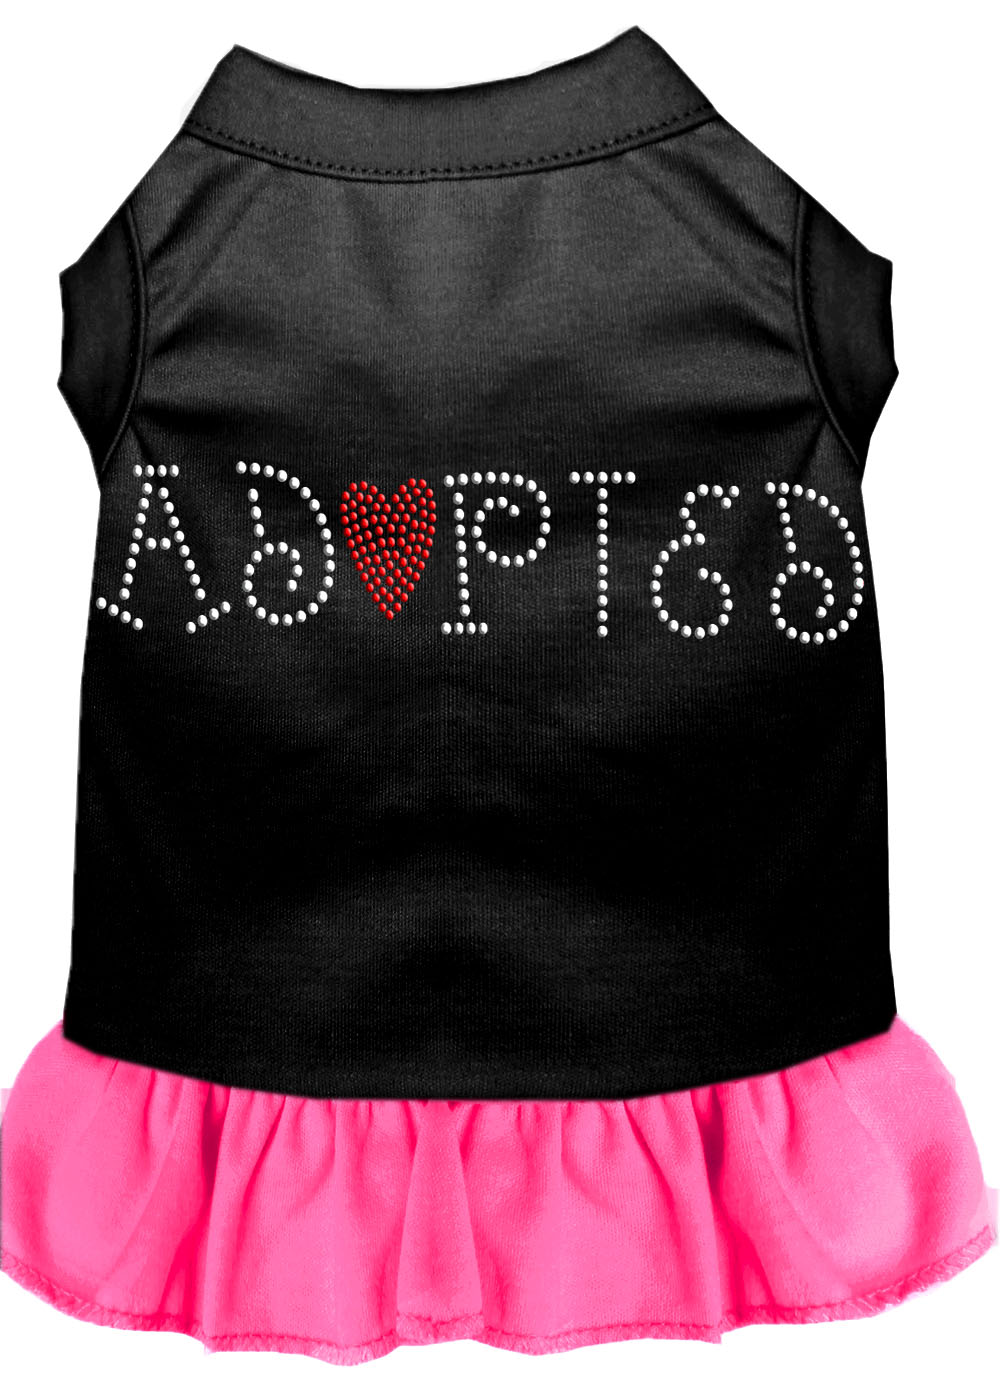 Adopted Rhinestone Dress Black with Bright Pink XS